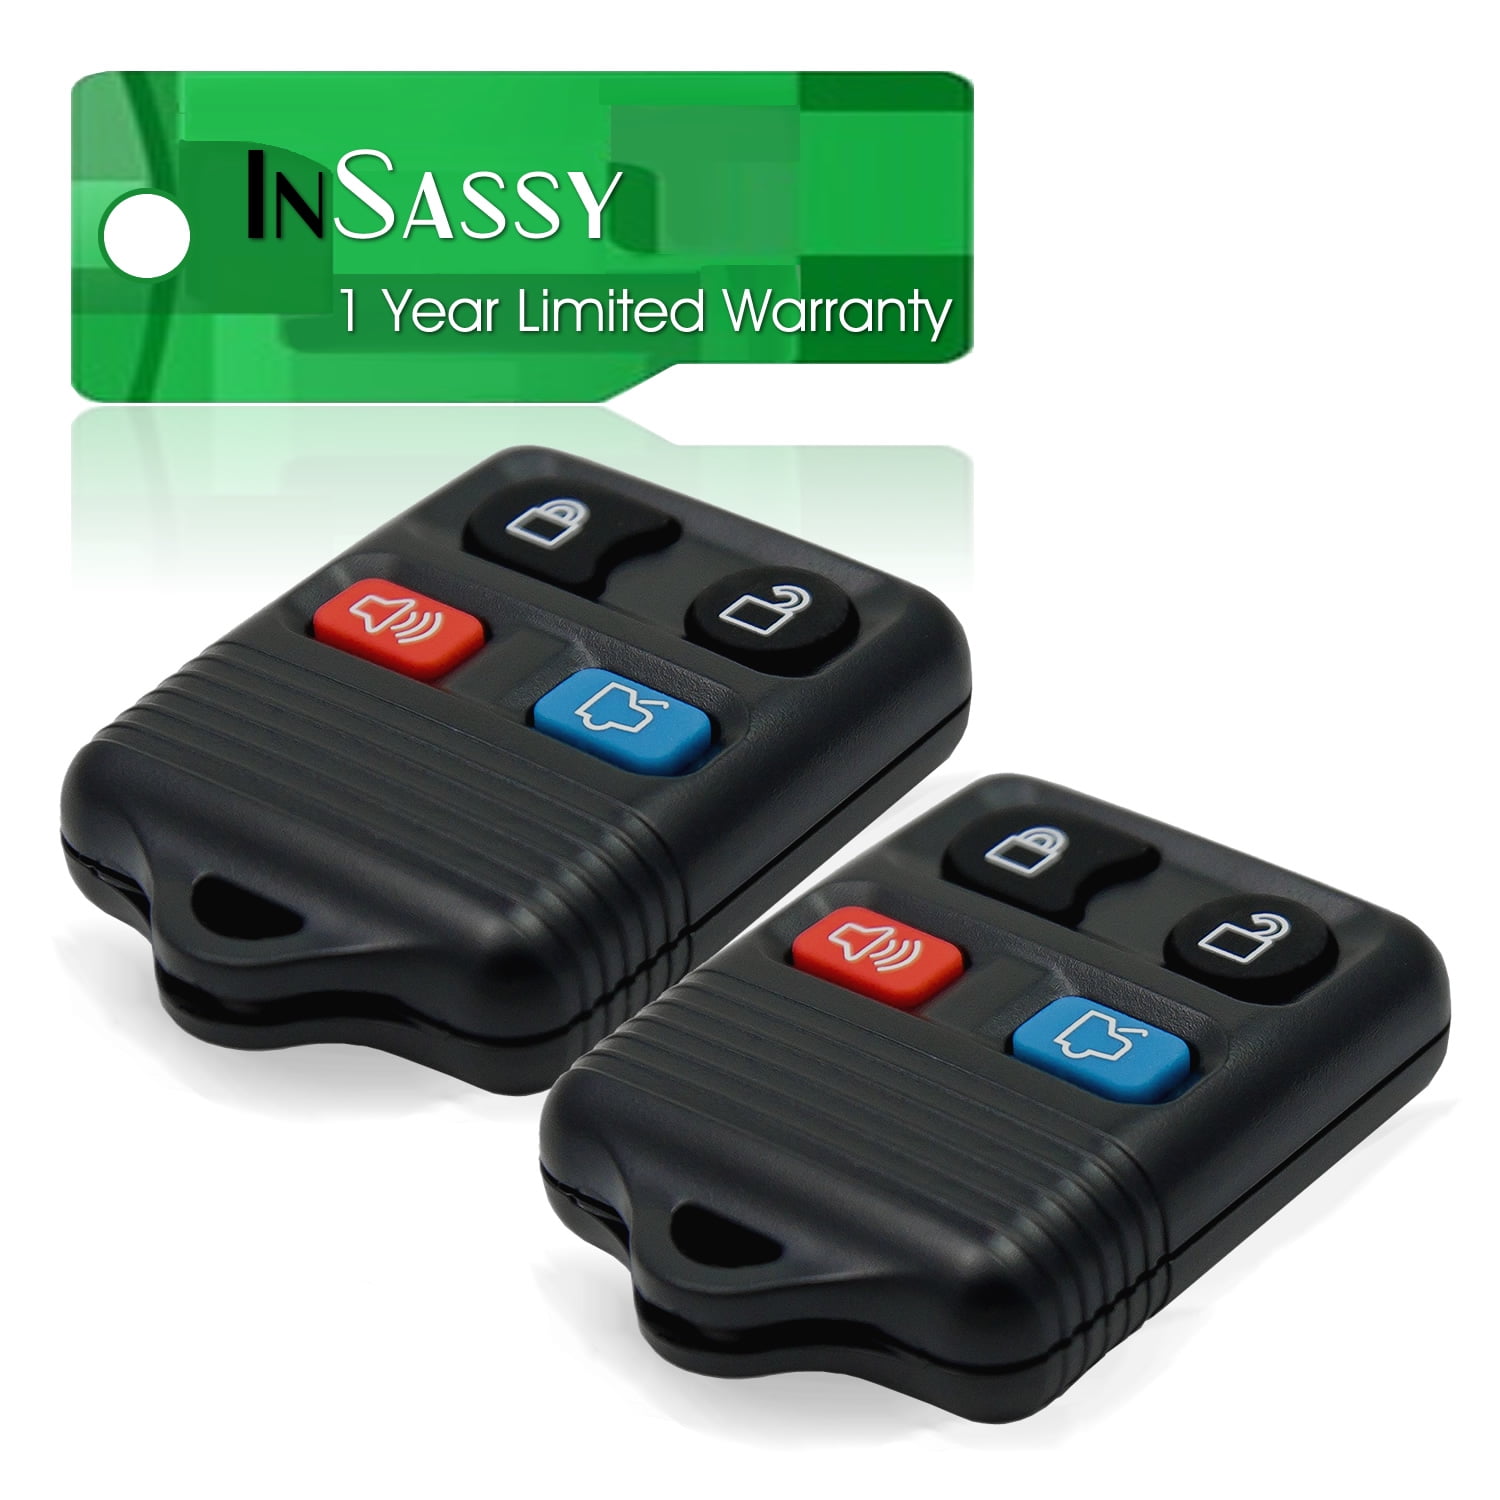 2 New Replacement Keyless Entry Blue Remote Key Fob For Ford Lincoln Mercury 